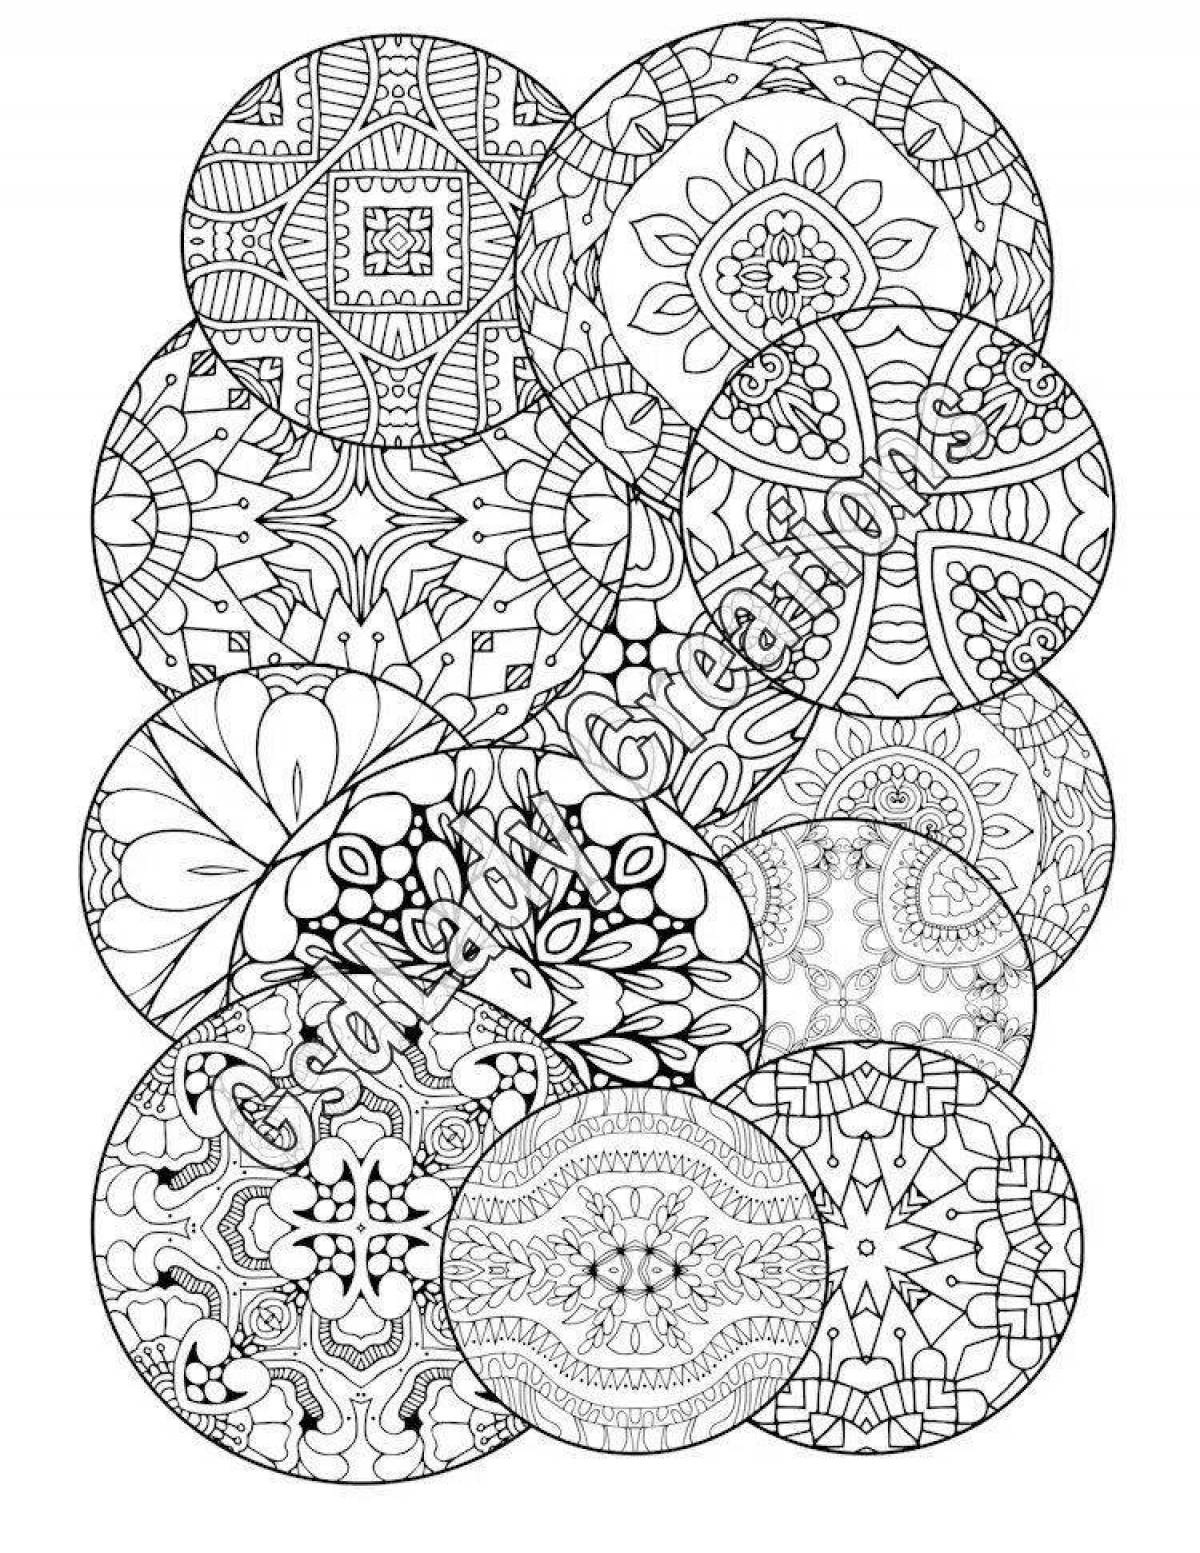 Blissful zendoodle coloring book